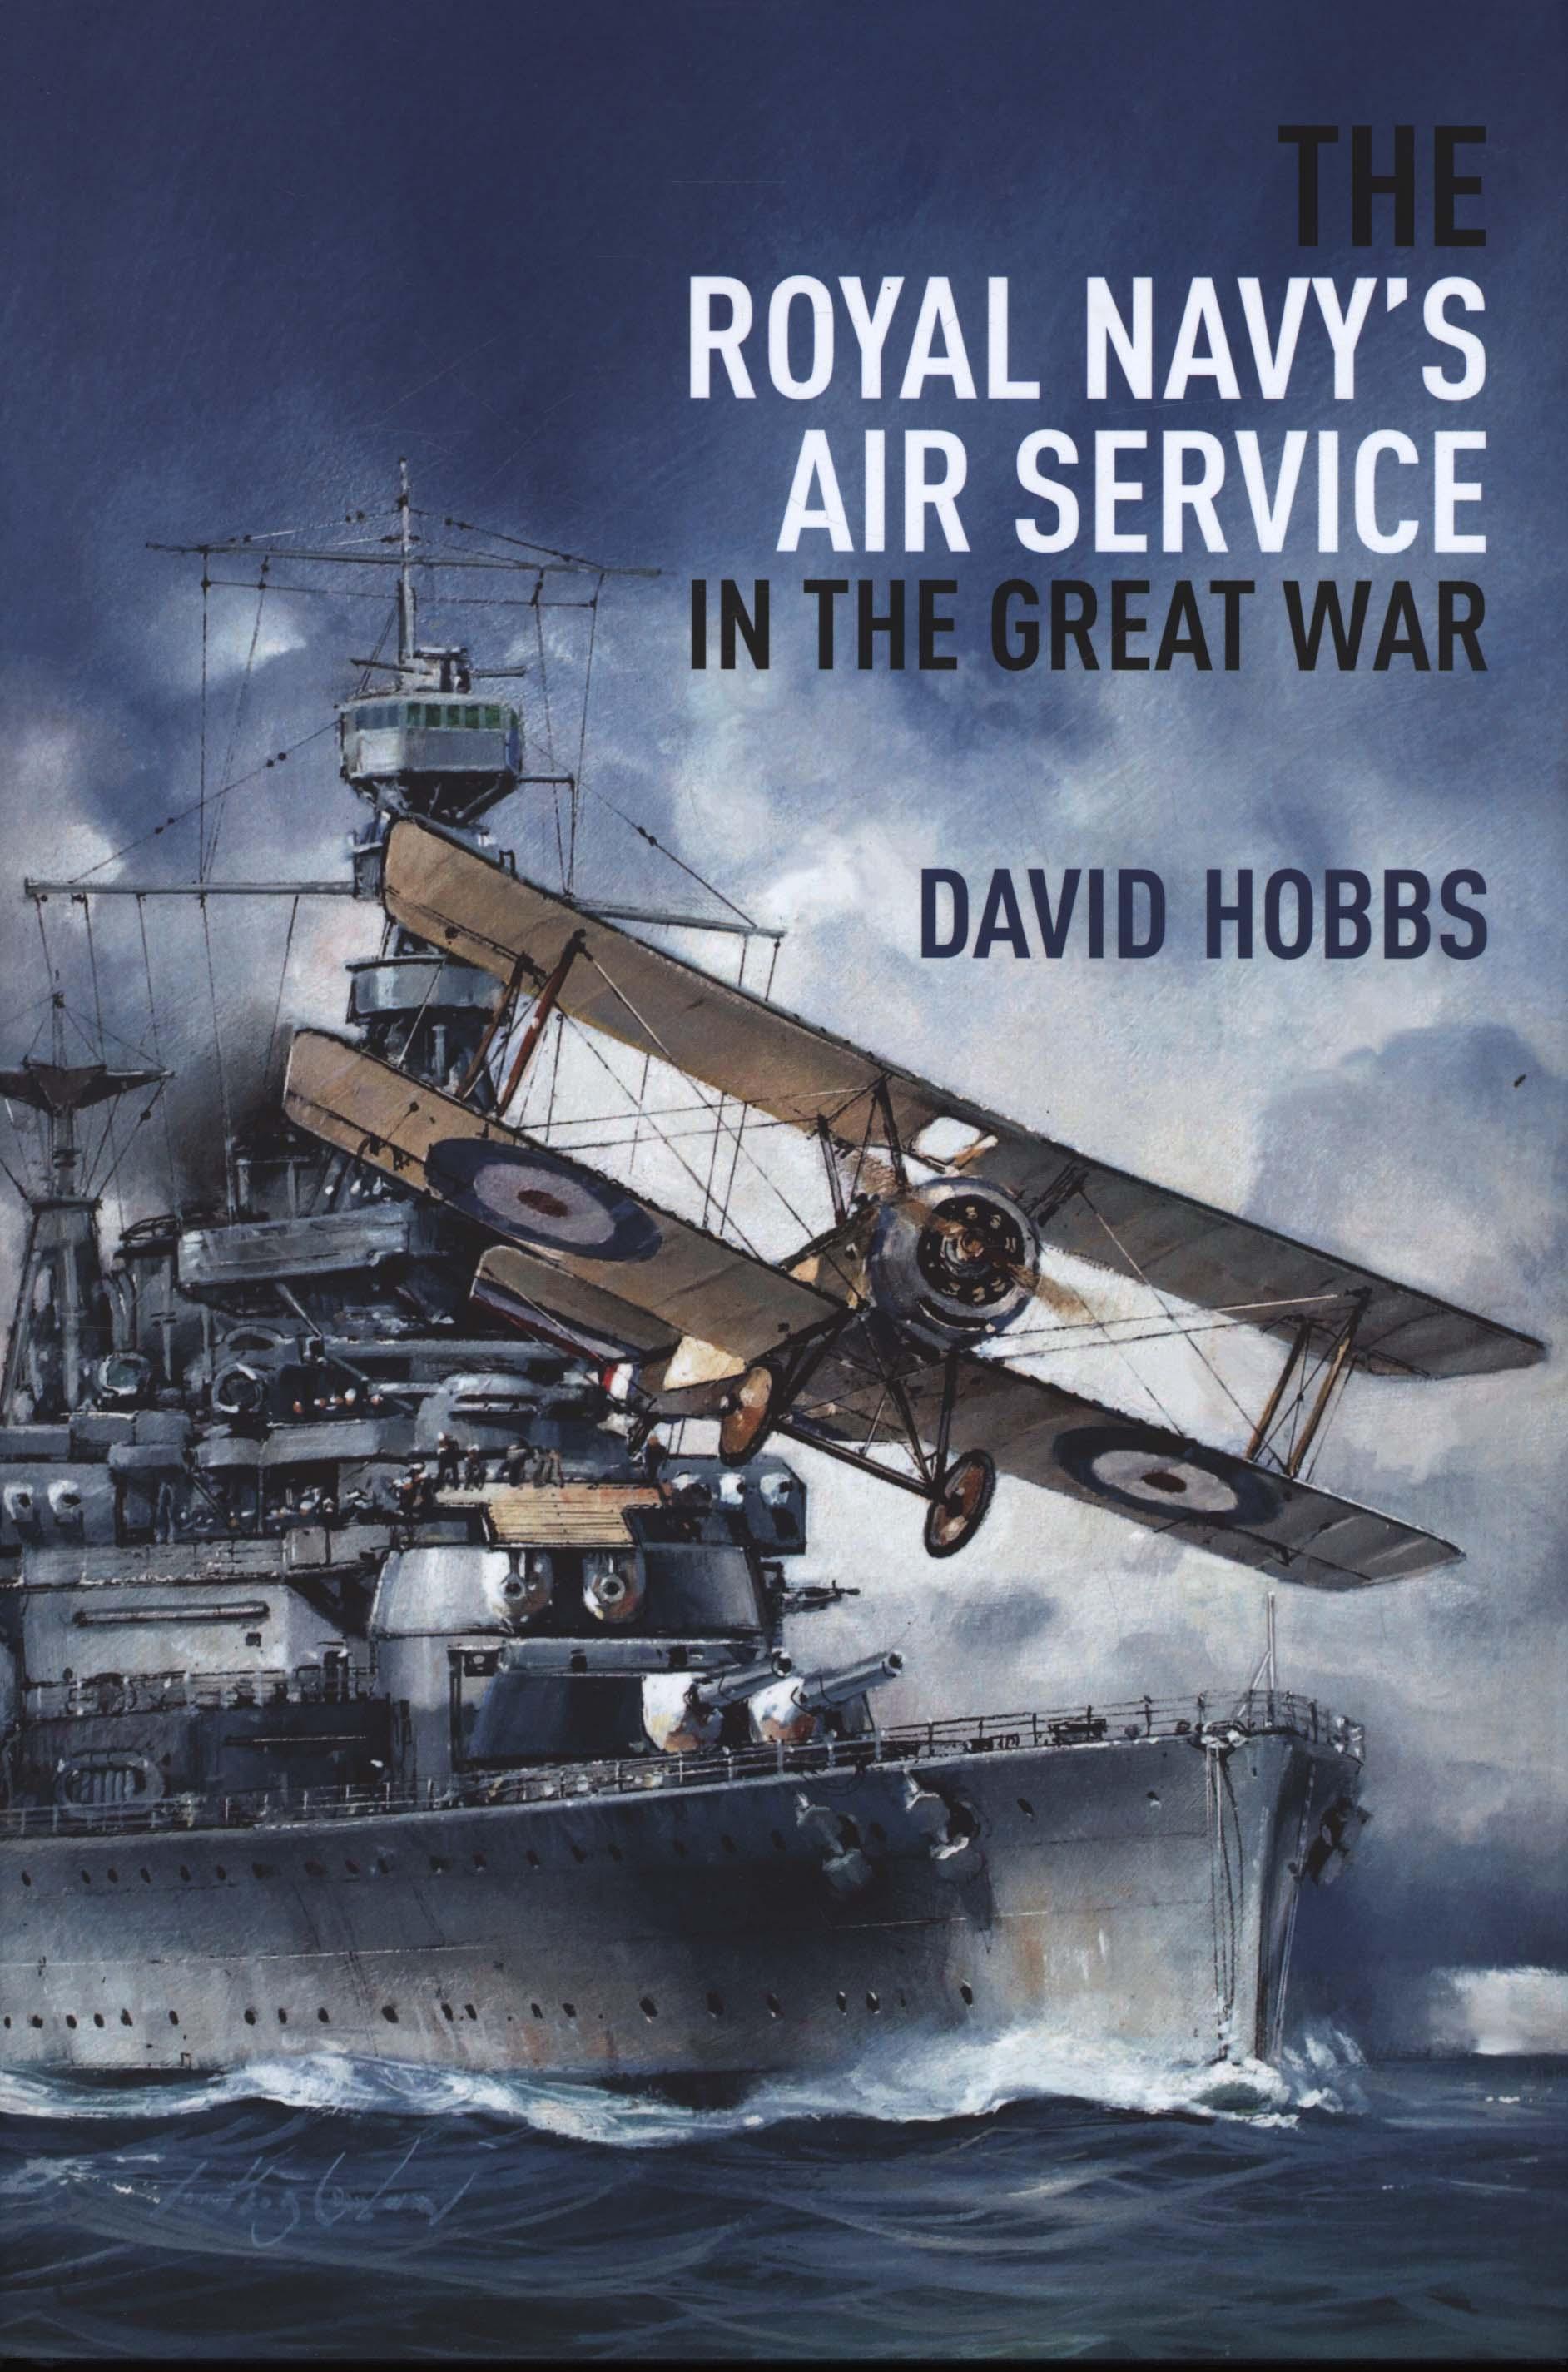 Royal Navy's Air Service in the Great War